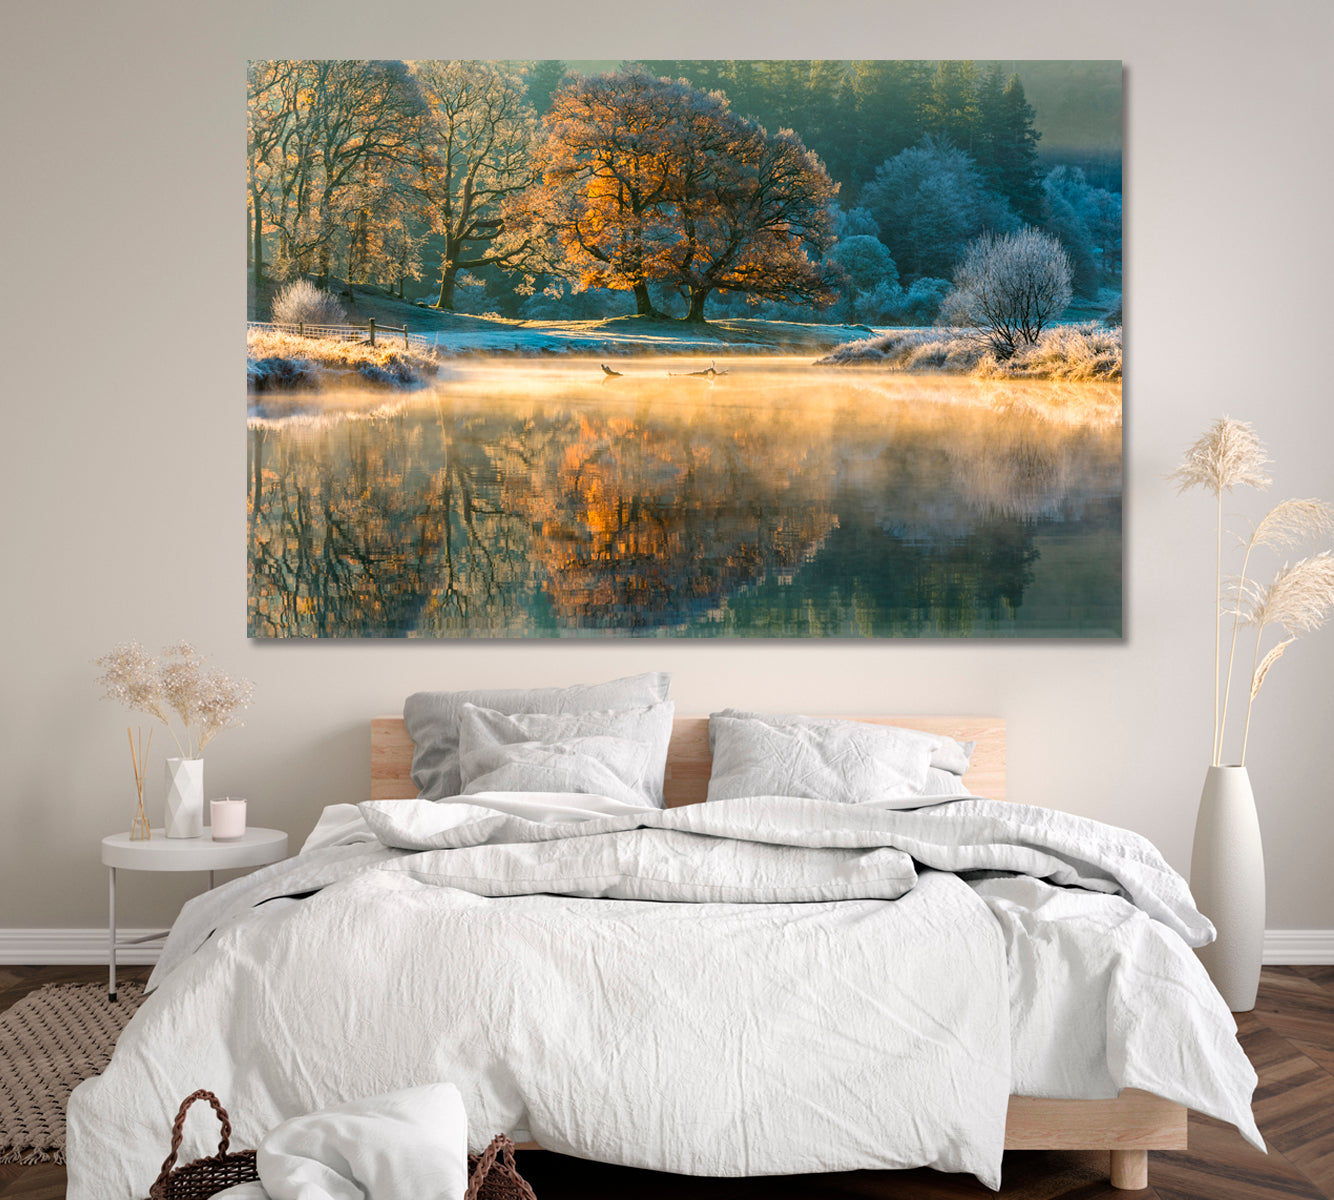 Lake of Elterwater England Canvas Print ArtLexy 1 Panel 24"x16" inches 